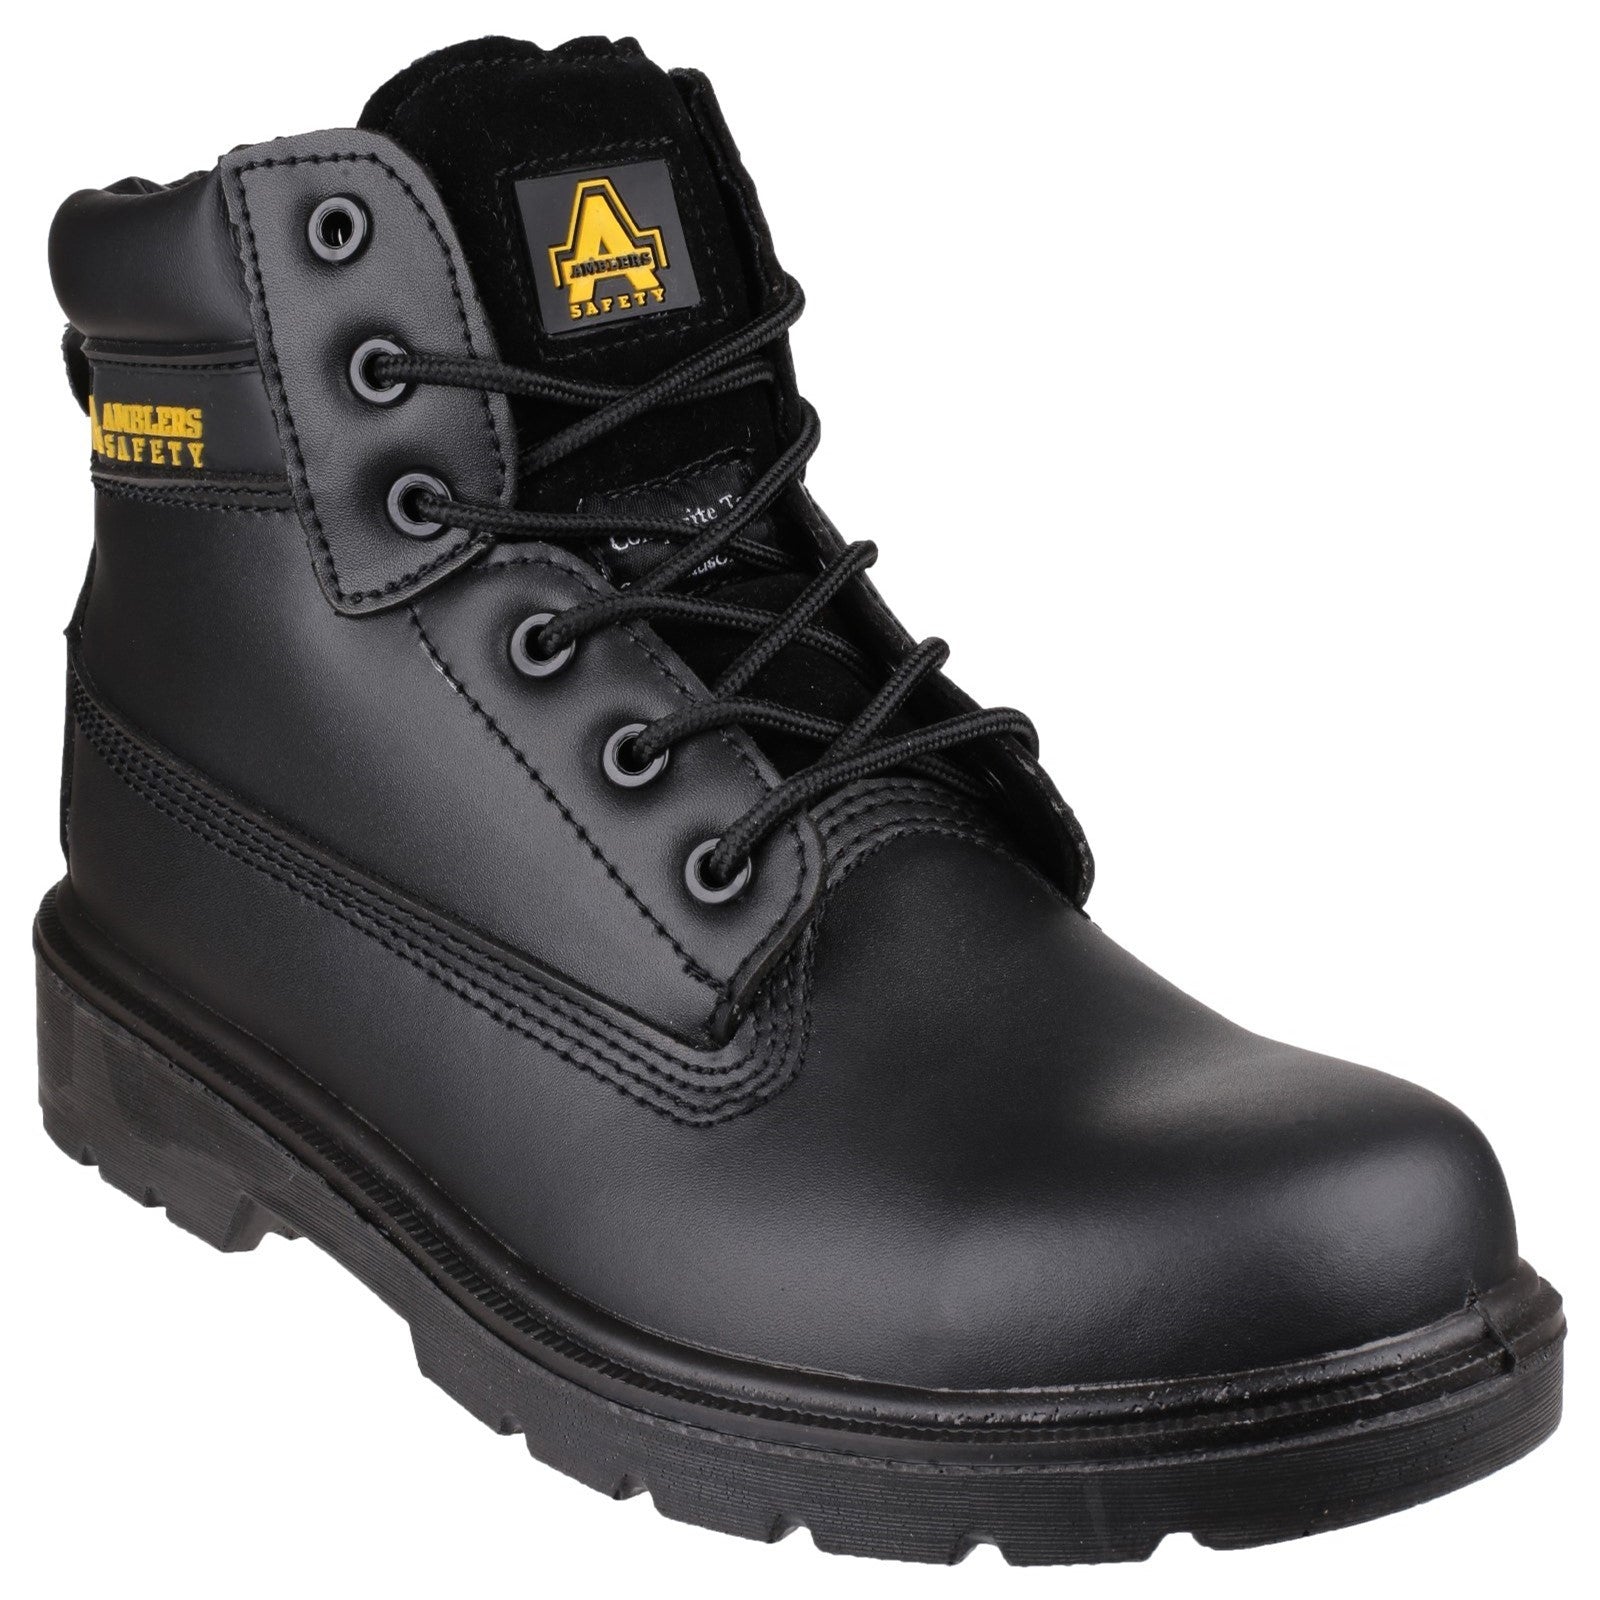 FS12C Metal Free Safety Boot, Amblers Safety